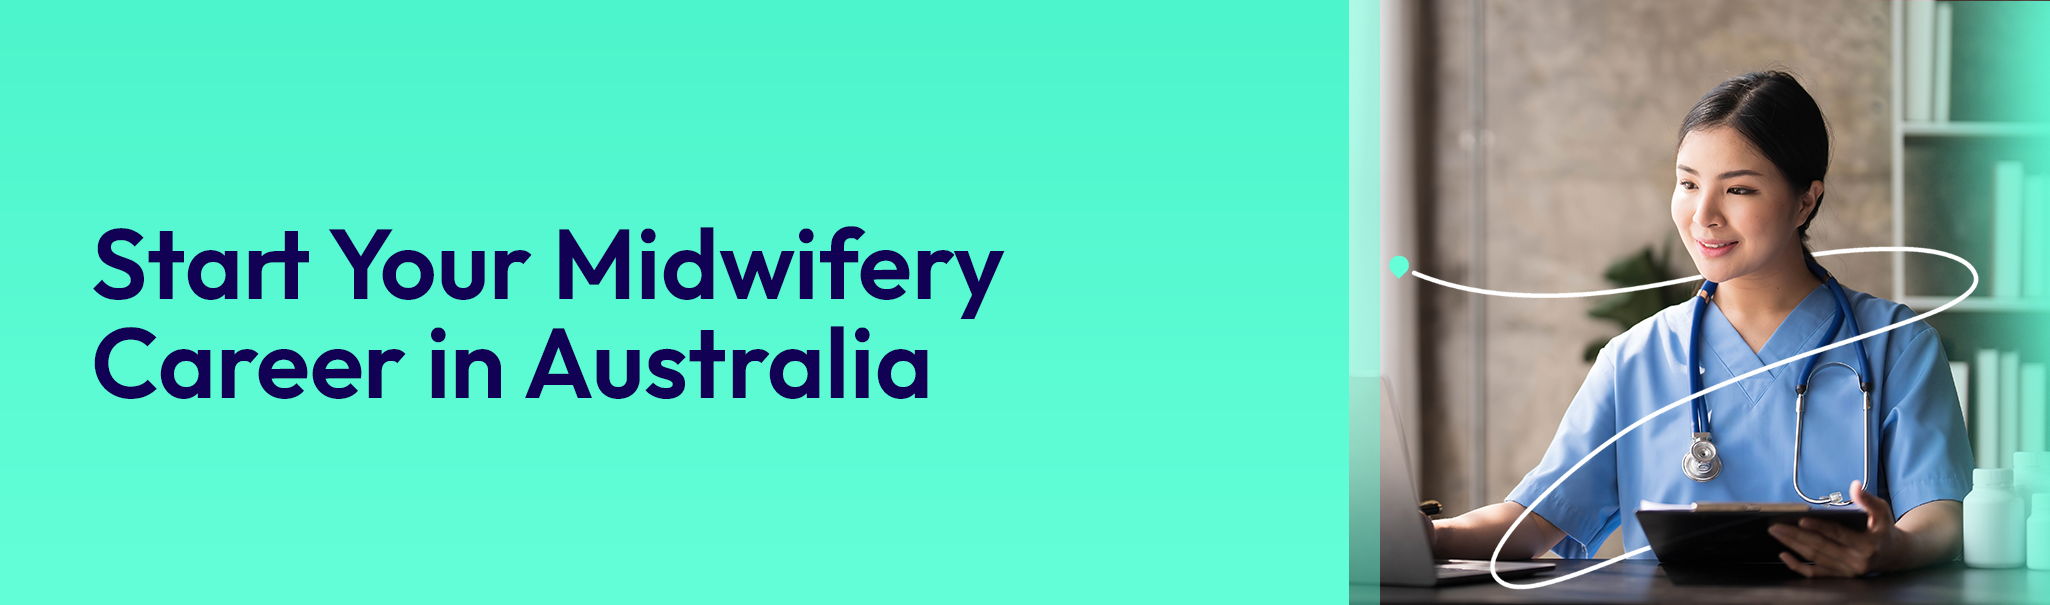 midwife How to Become A Midwife In Australia | PR Pathways